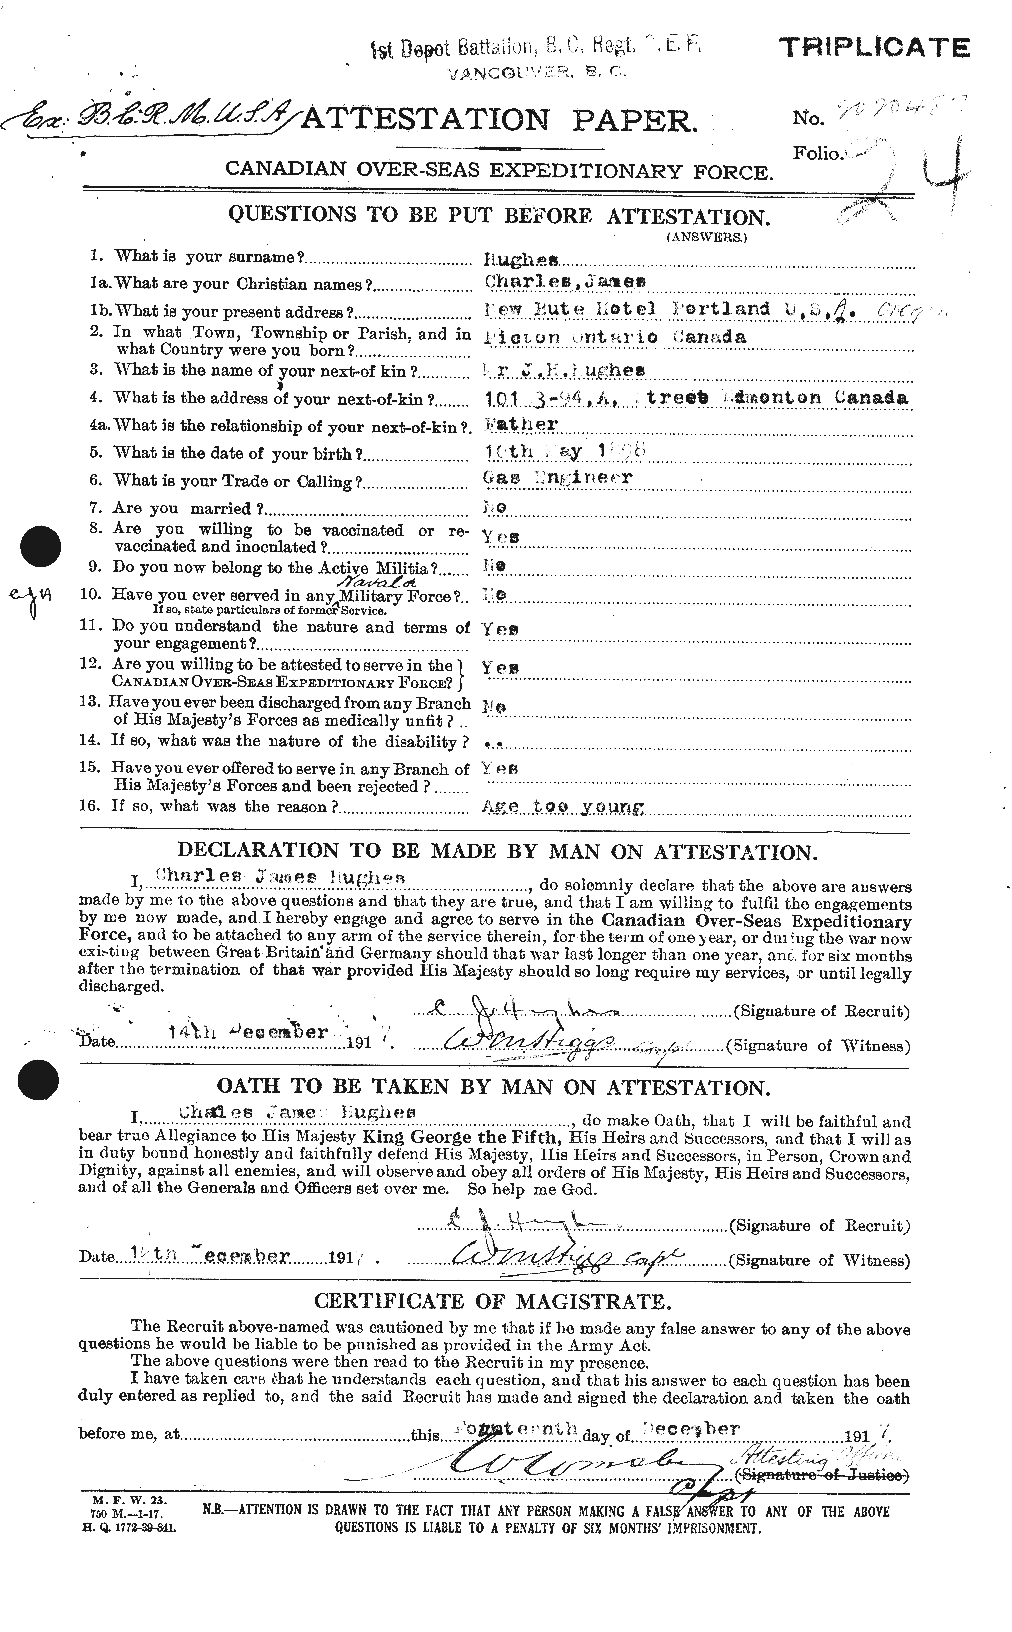 Personnel Records of the First World War - CEF 402611a